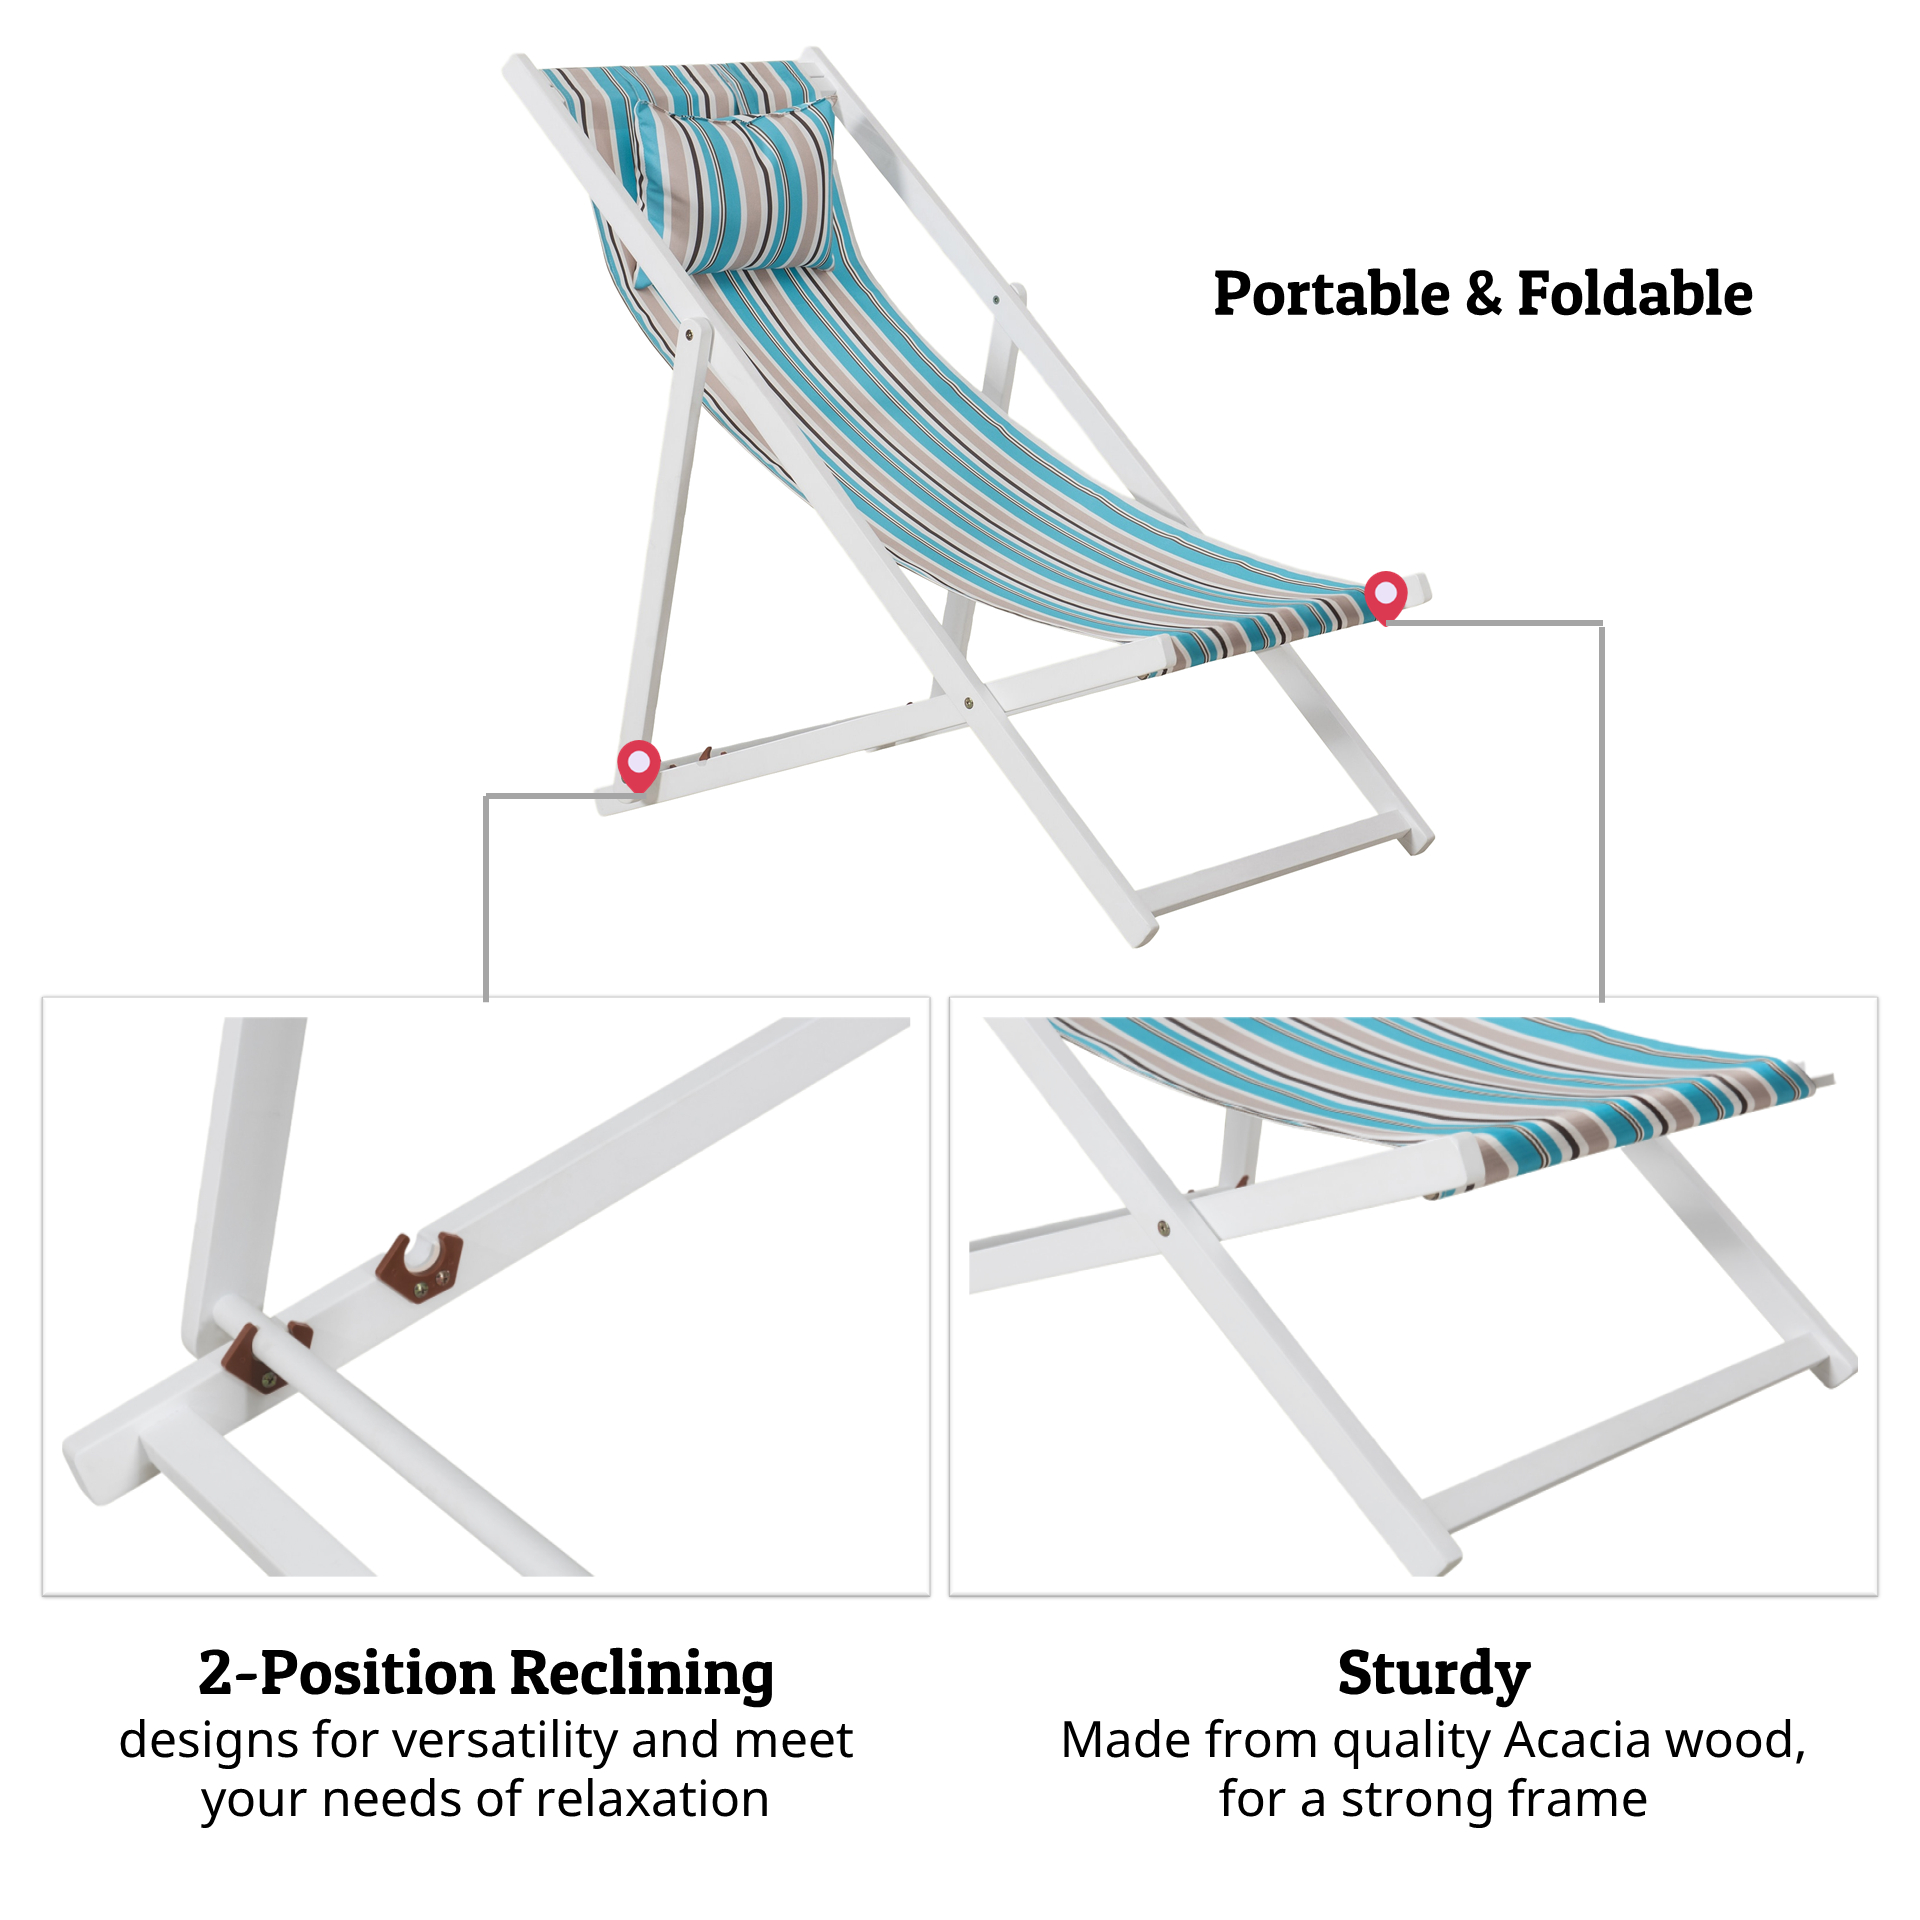 Sunjoy Belton Folding Reclining Beach Chair with Cushioned Headrest, Wood Sling Chair for Outdoor Seating, Lightweight Camping Chaise Lounge Chair - image 4 of 11